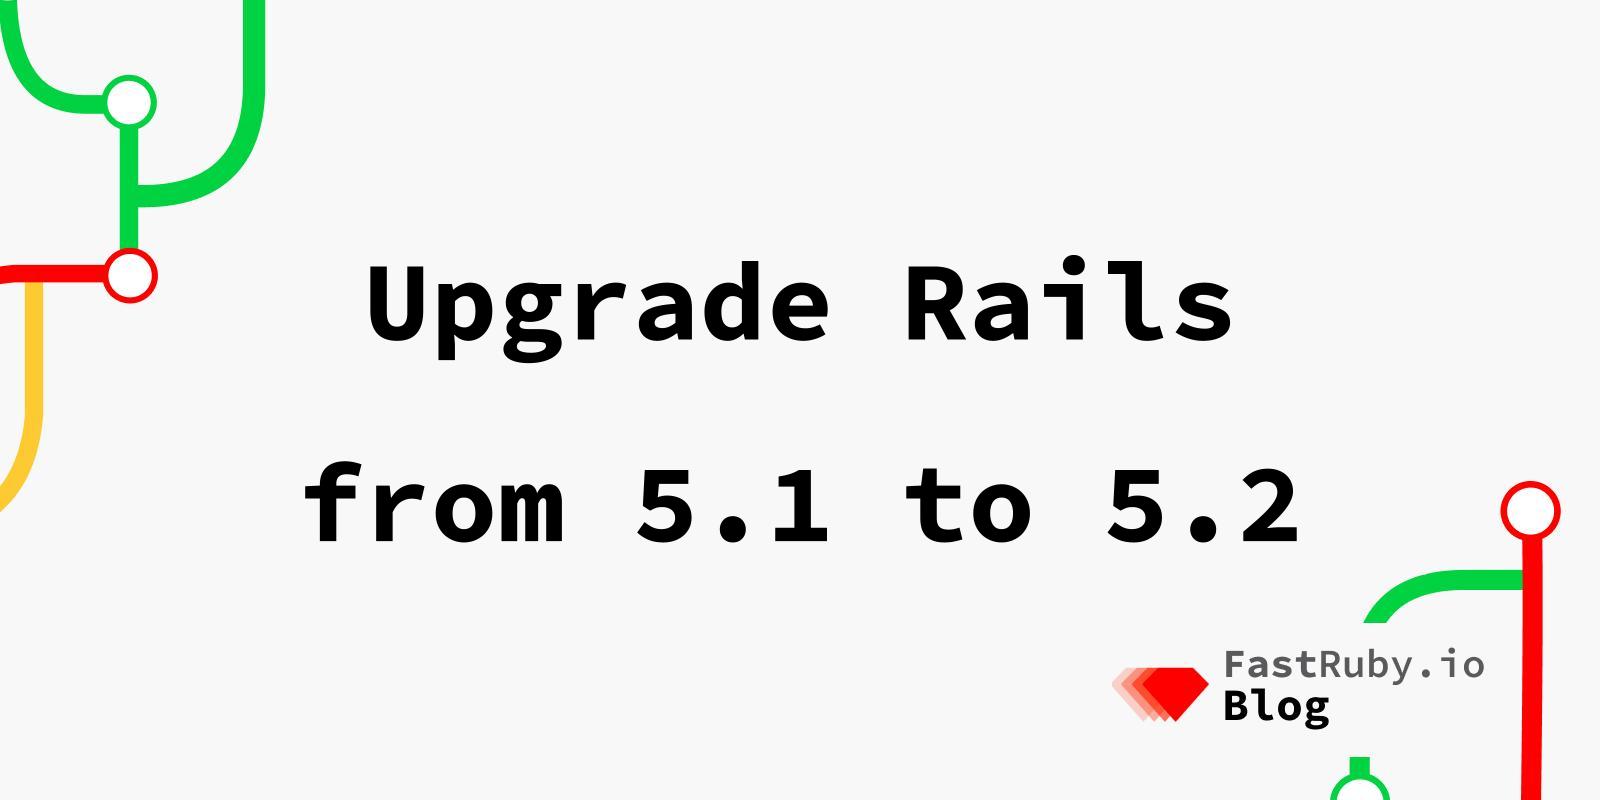 Upgrade Rails from 5.1 to 5.2